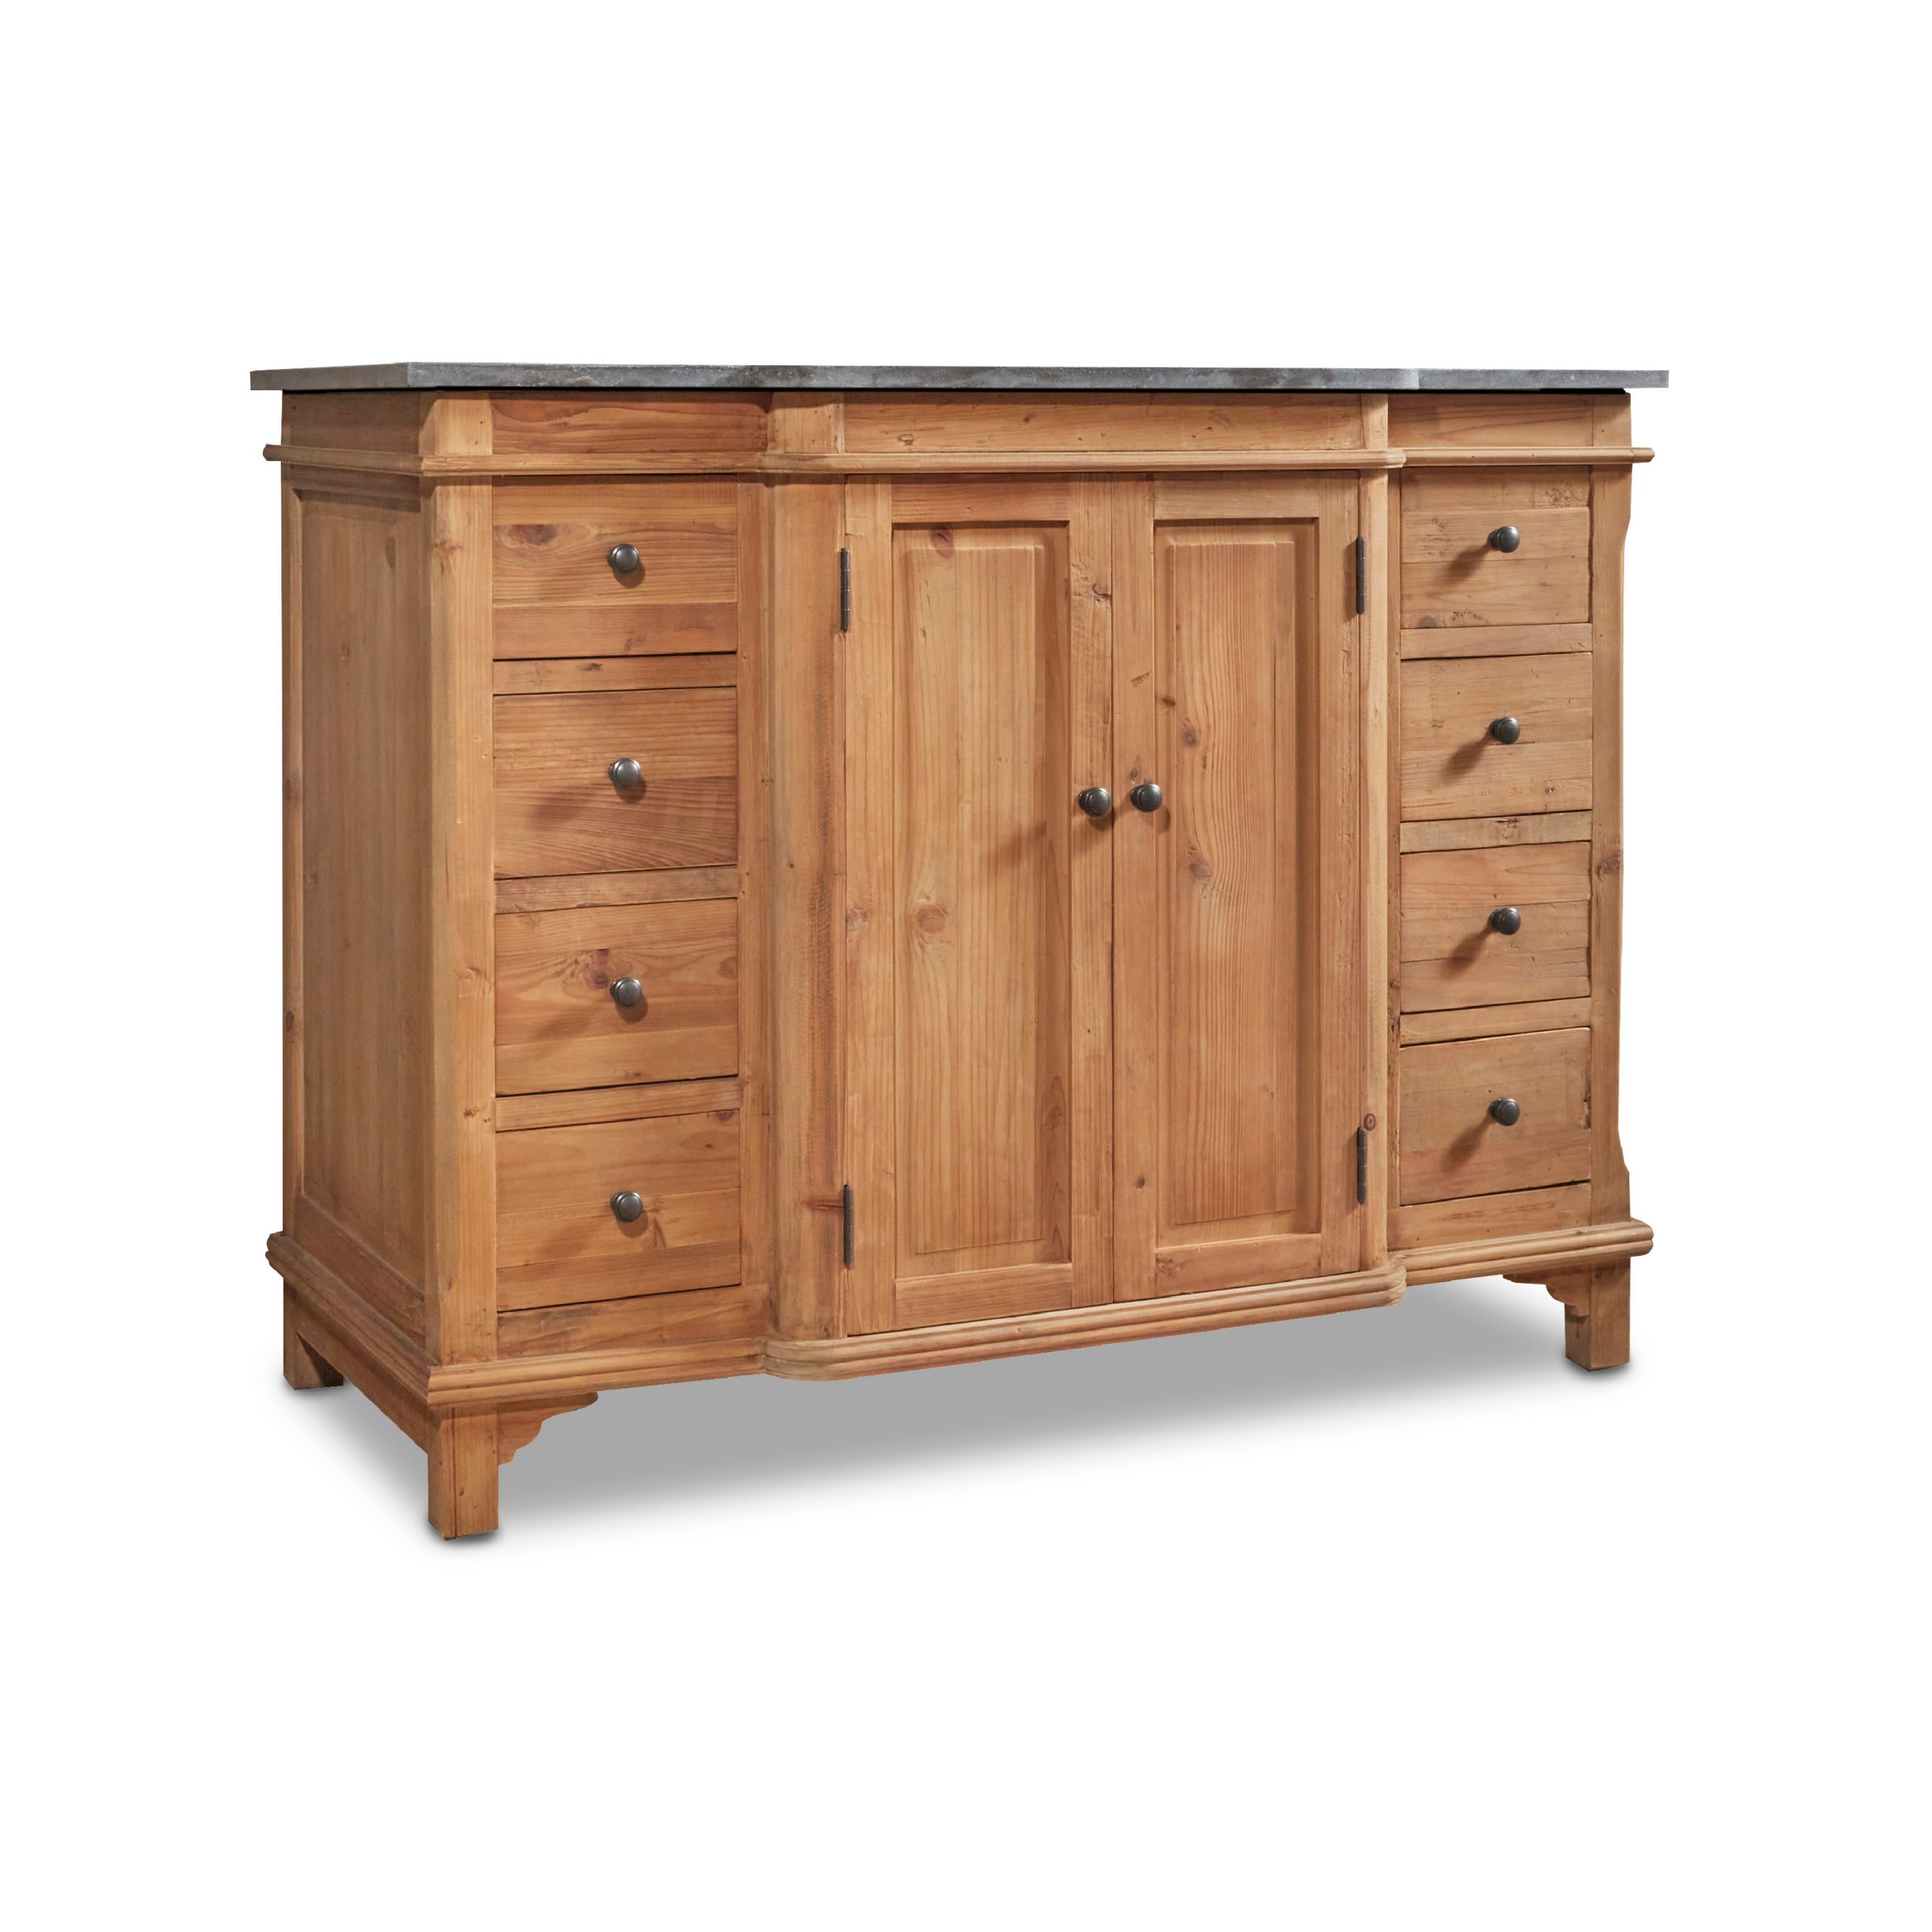 46" Handcrafted Reclaimed Pine Solid Wood Single Bath Vanity Natural Pine Finish